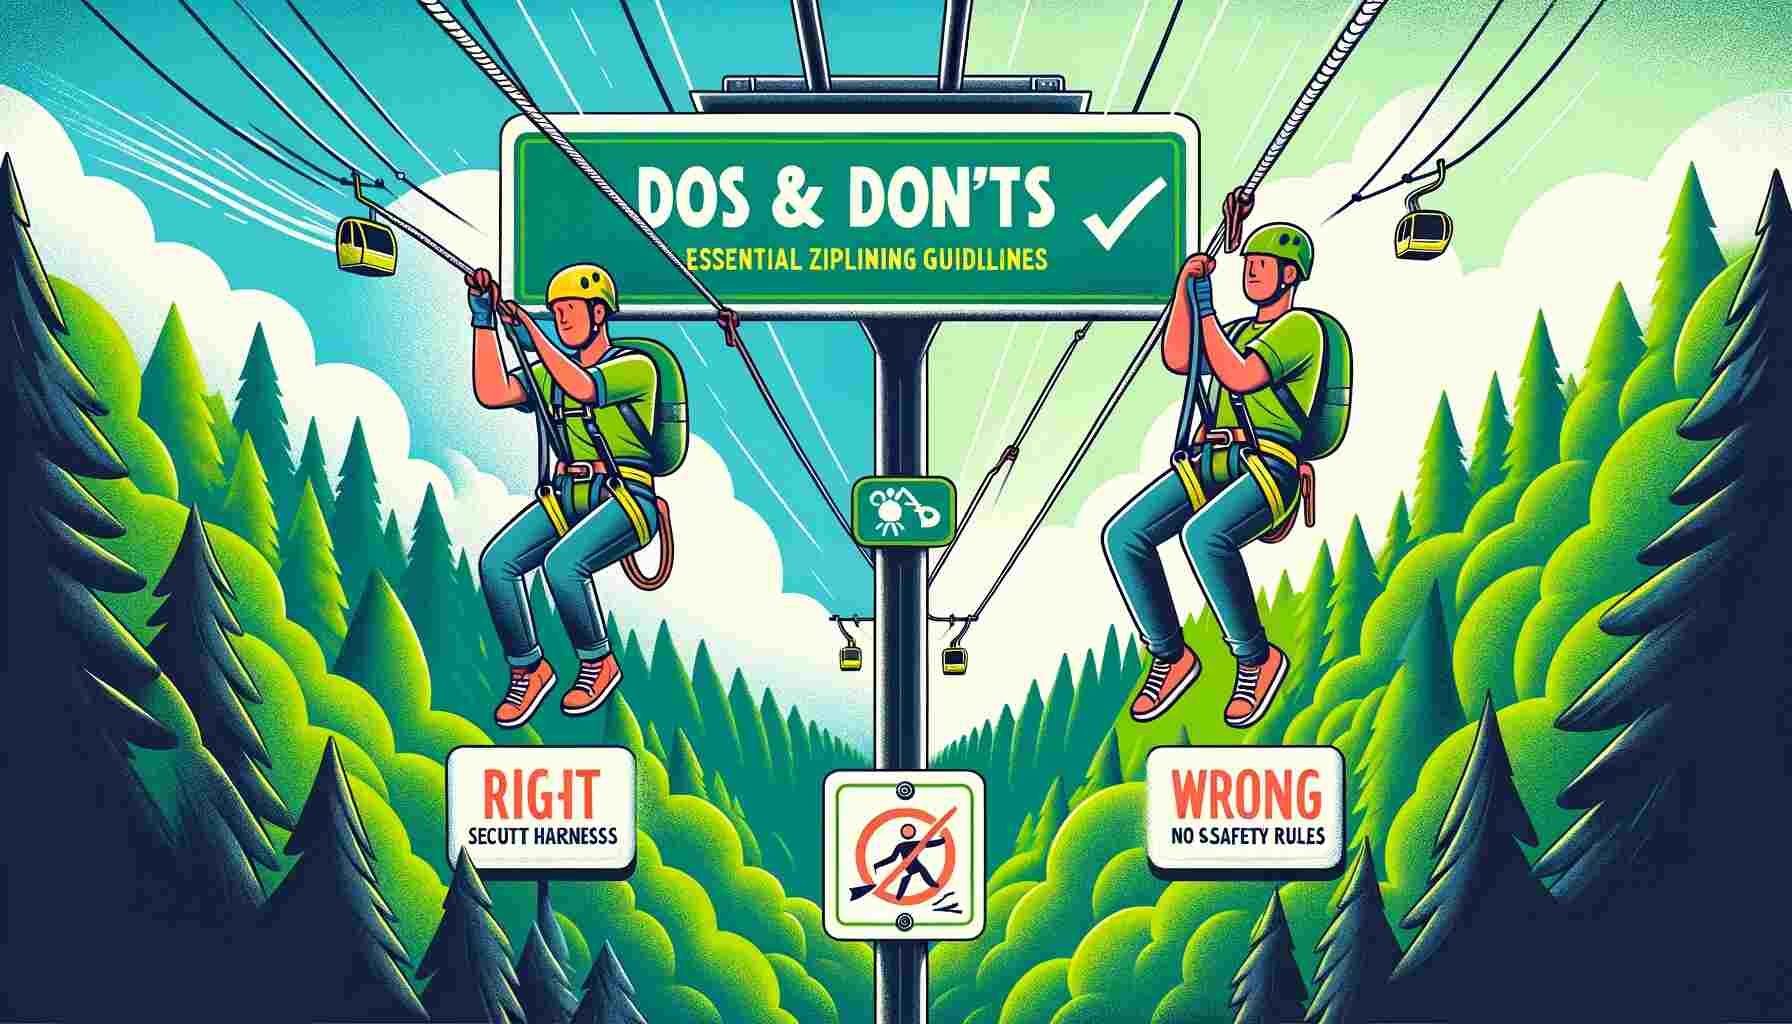 Zipline Dos and Don'ts: Essential Ziplining Guidelines